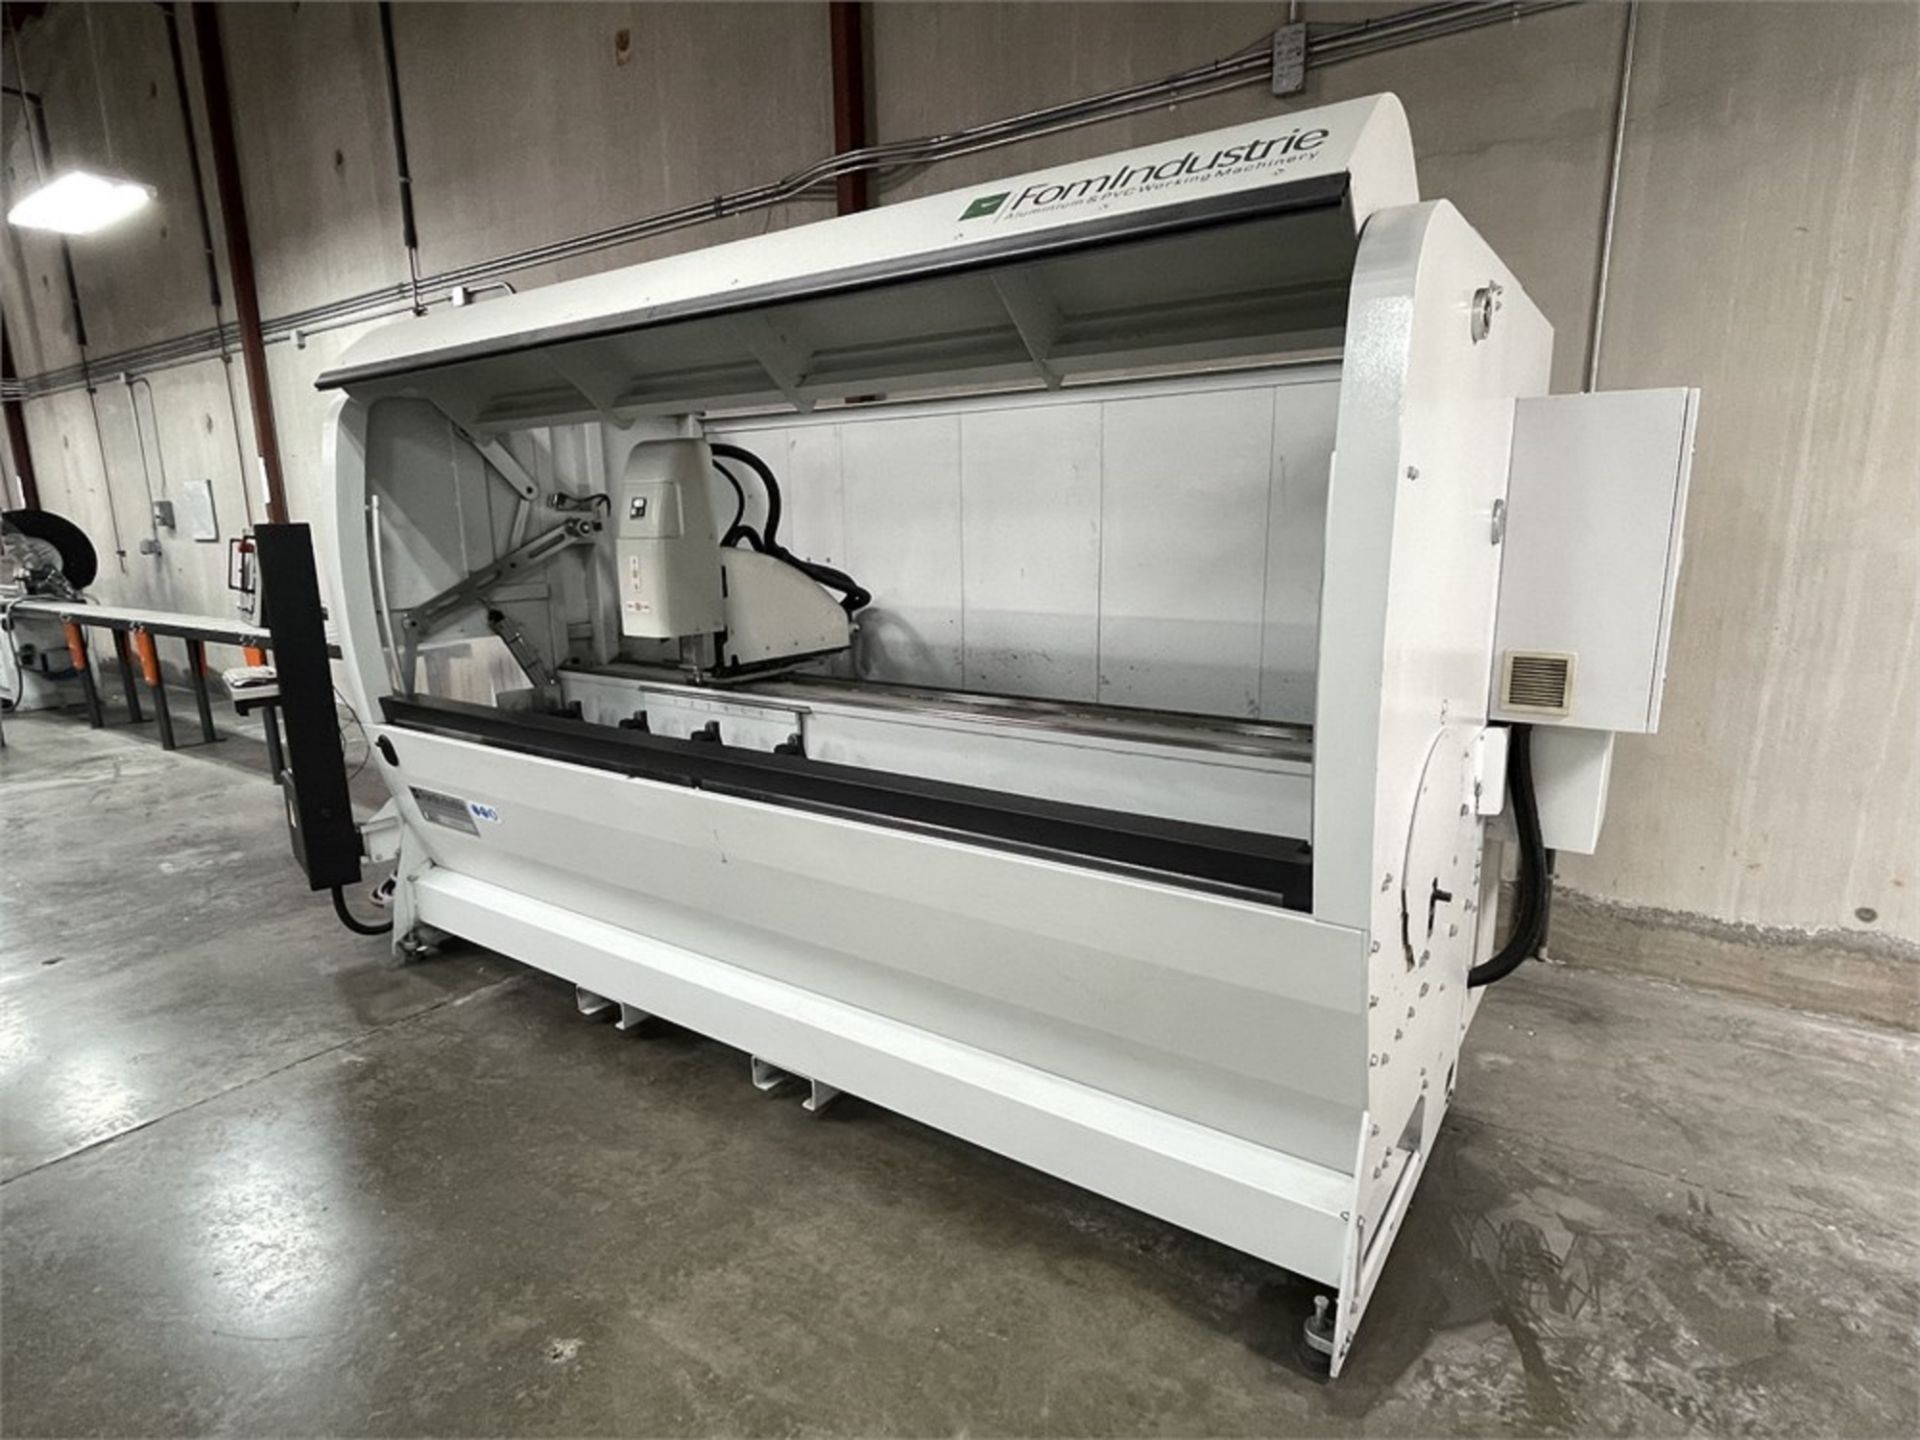 10' FOM INDUSTRIE MODEL MODUS CNC 4-AXIS ALUMINUM PROFILE MACHINING CENTER/ROUTER, S/N A0700194 - Image 3 of 14